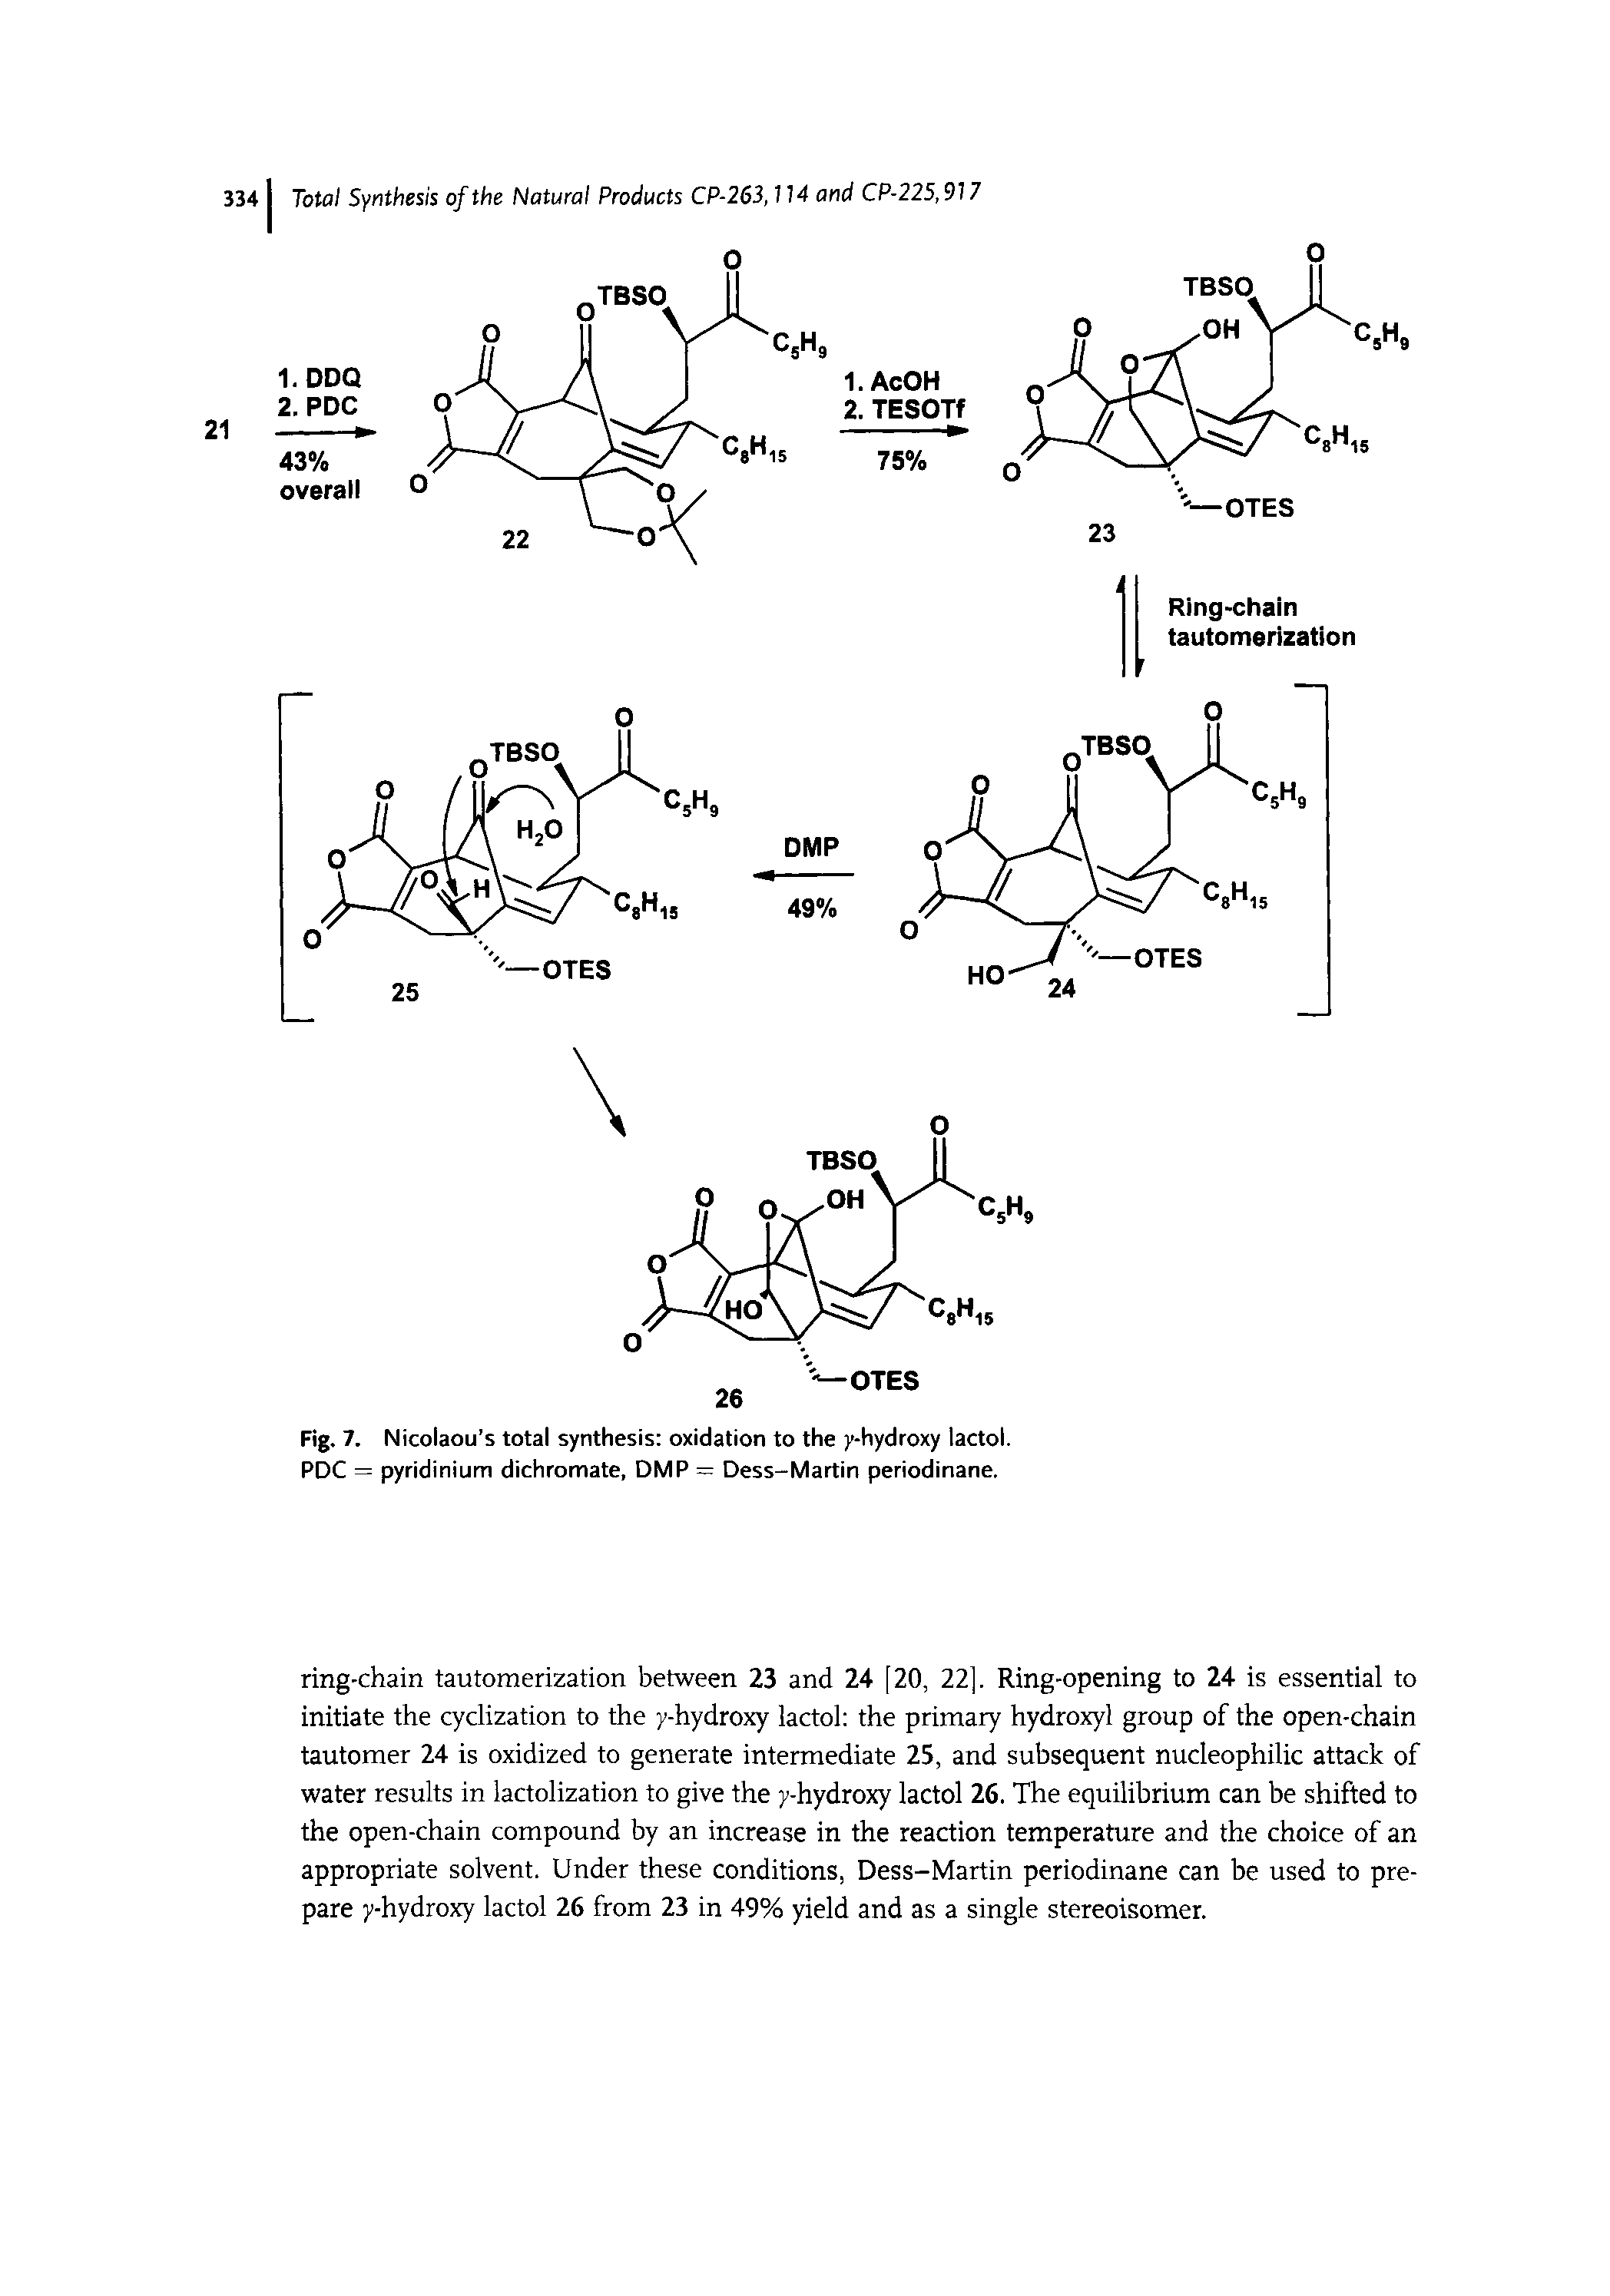 Fig. 7. Nicolaou s total synthesis oxidation to the y-hydroxy lactol. PDC = pyridinium dichromate, DMP = Dess-Martin periodinane.